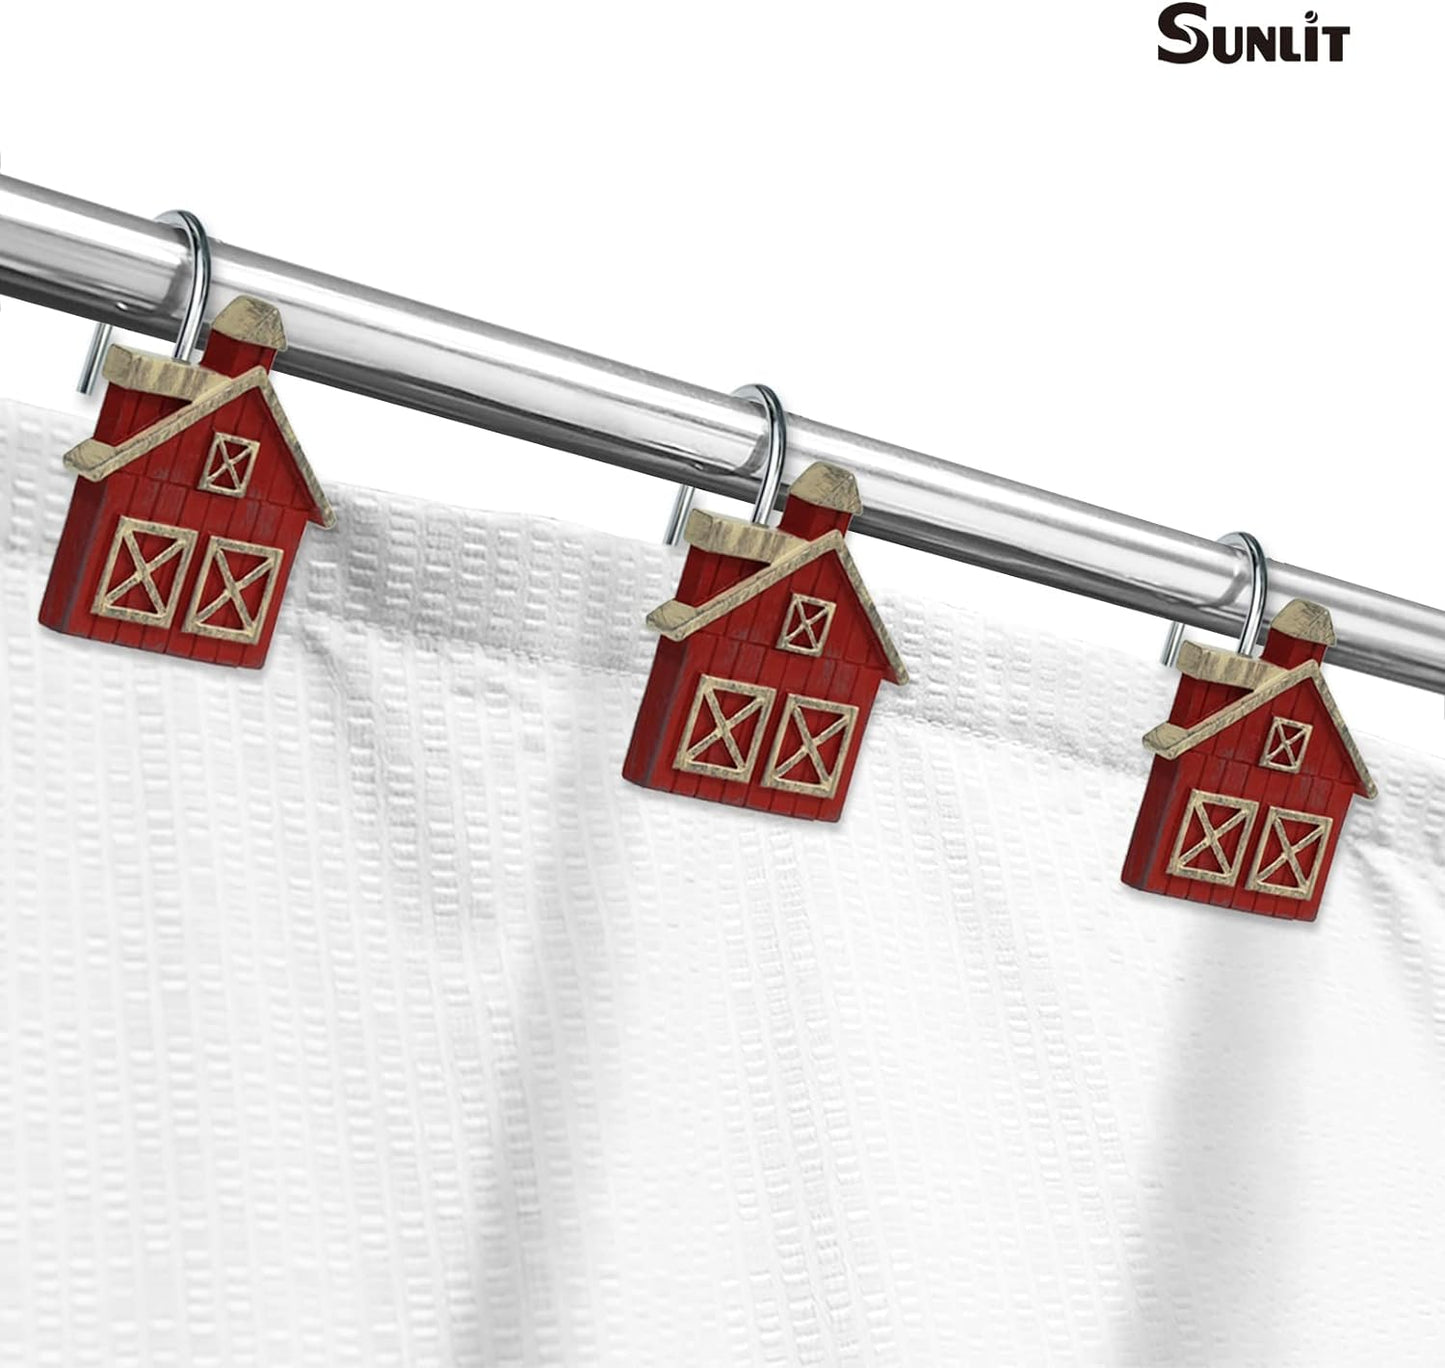 Sunlit Farmhouse Barn Christmas Shower Curtain Hooks, Rustic Red House Decorative Shower Curtain Rings, Resin, Wooden Plank Rural Country Bathroom Decoration Shower Curtain Hooks-12 Pack